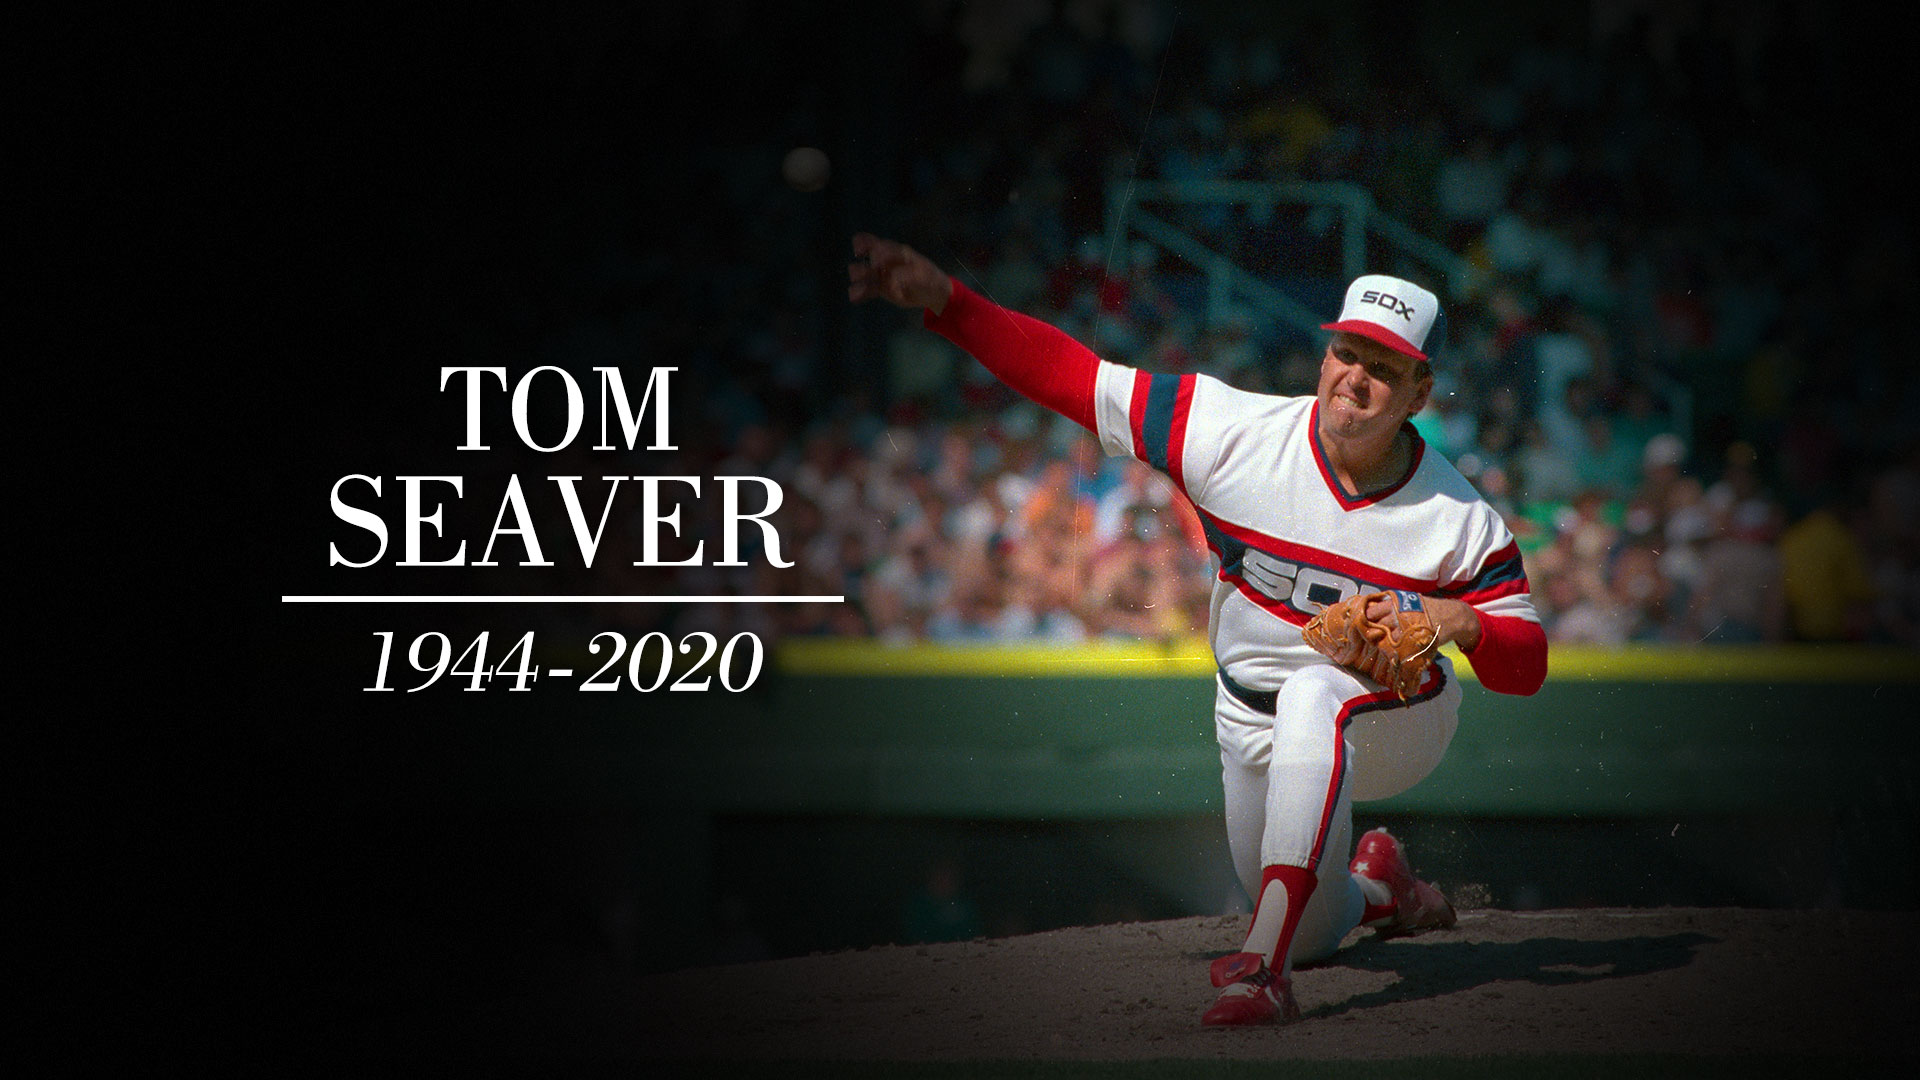 Tom Seaver's 300th win  There will never be another Tom Seaver